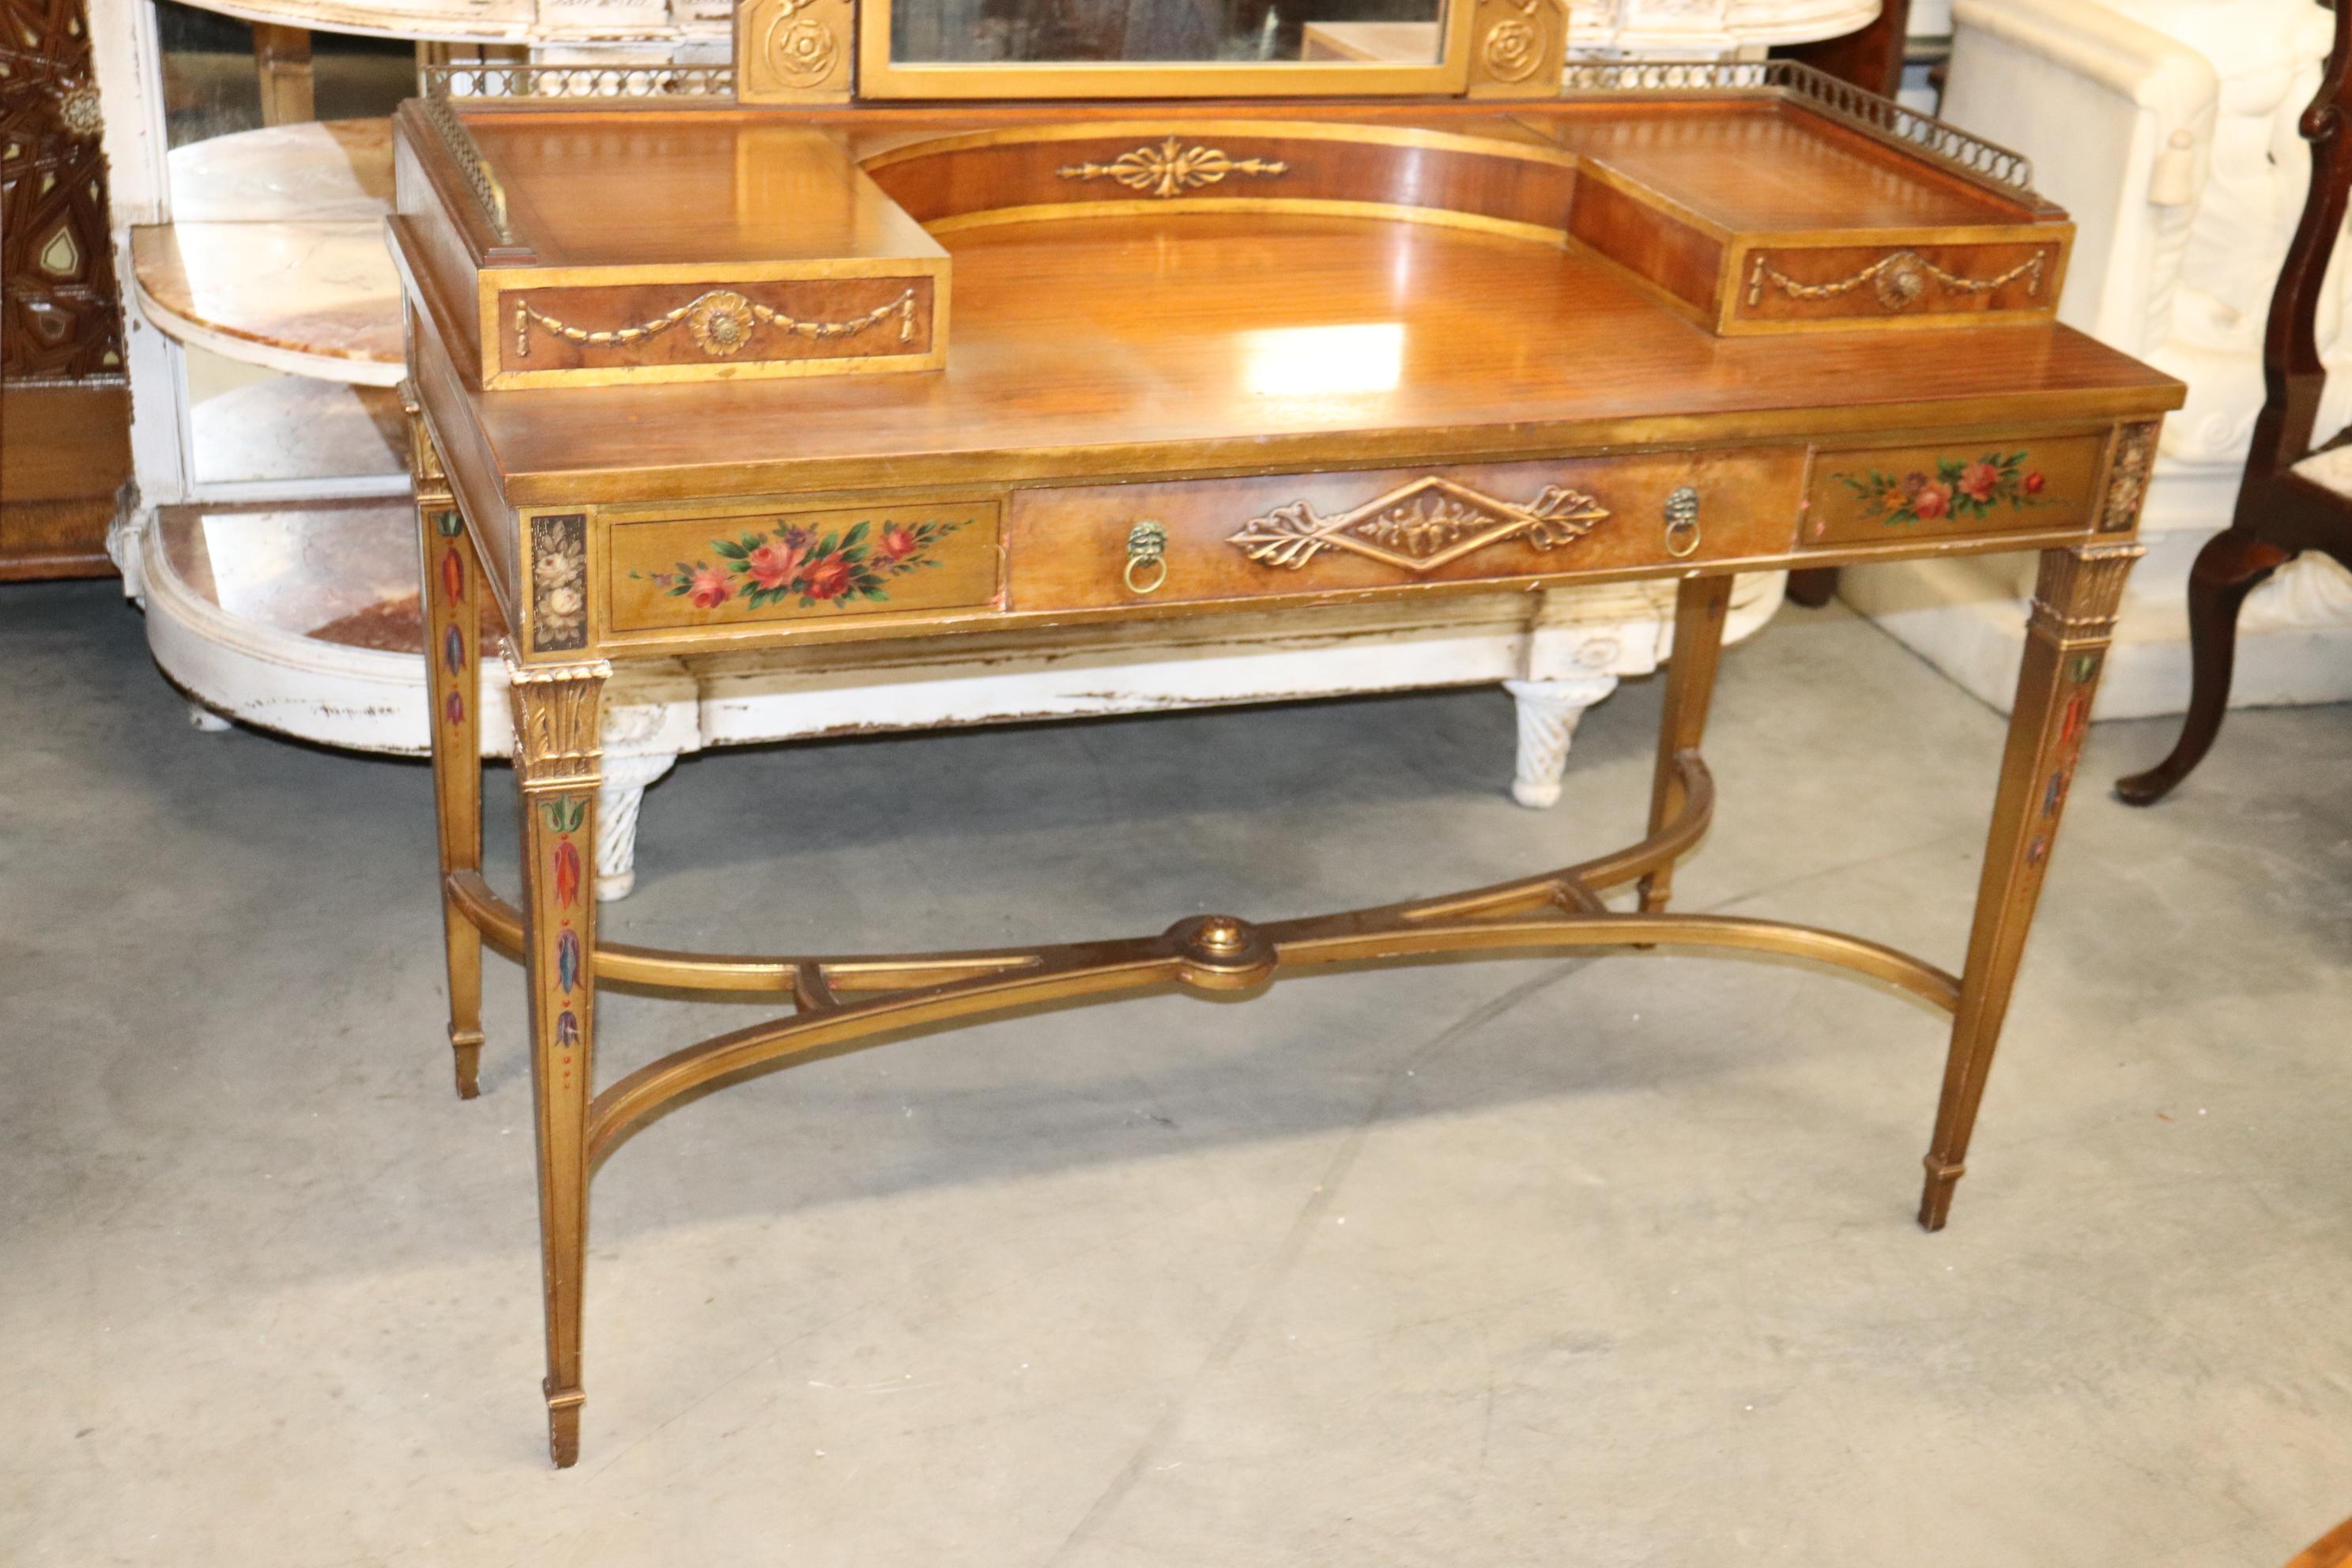 This is a superb antique English paint decorated Adams vanity. Look at the gorgeous wood quality and the fantastic patina and time-worn painted details. The vanity measures 48 wide x 63 tall x 22 deep and the surface is 30 inches and the kneehole is